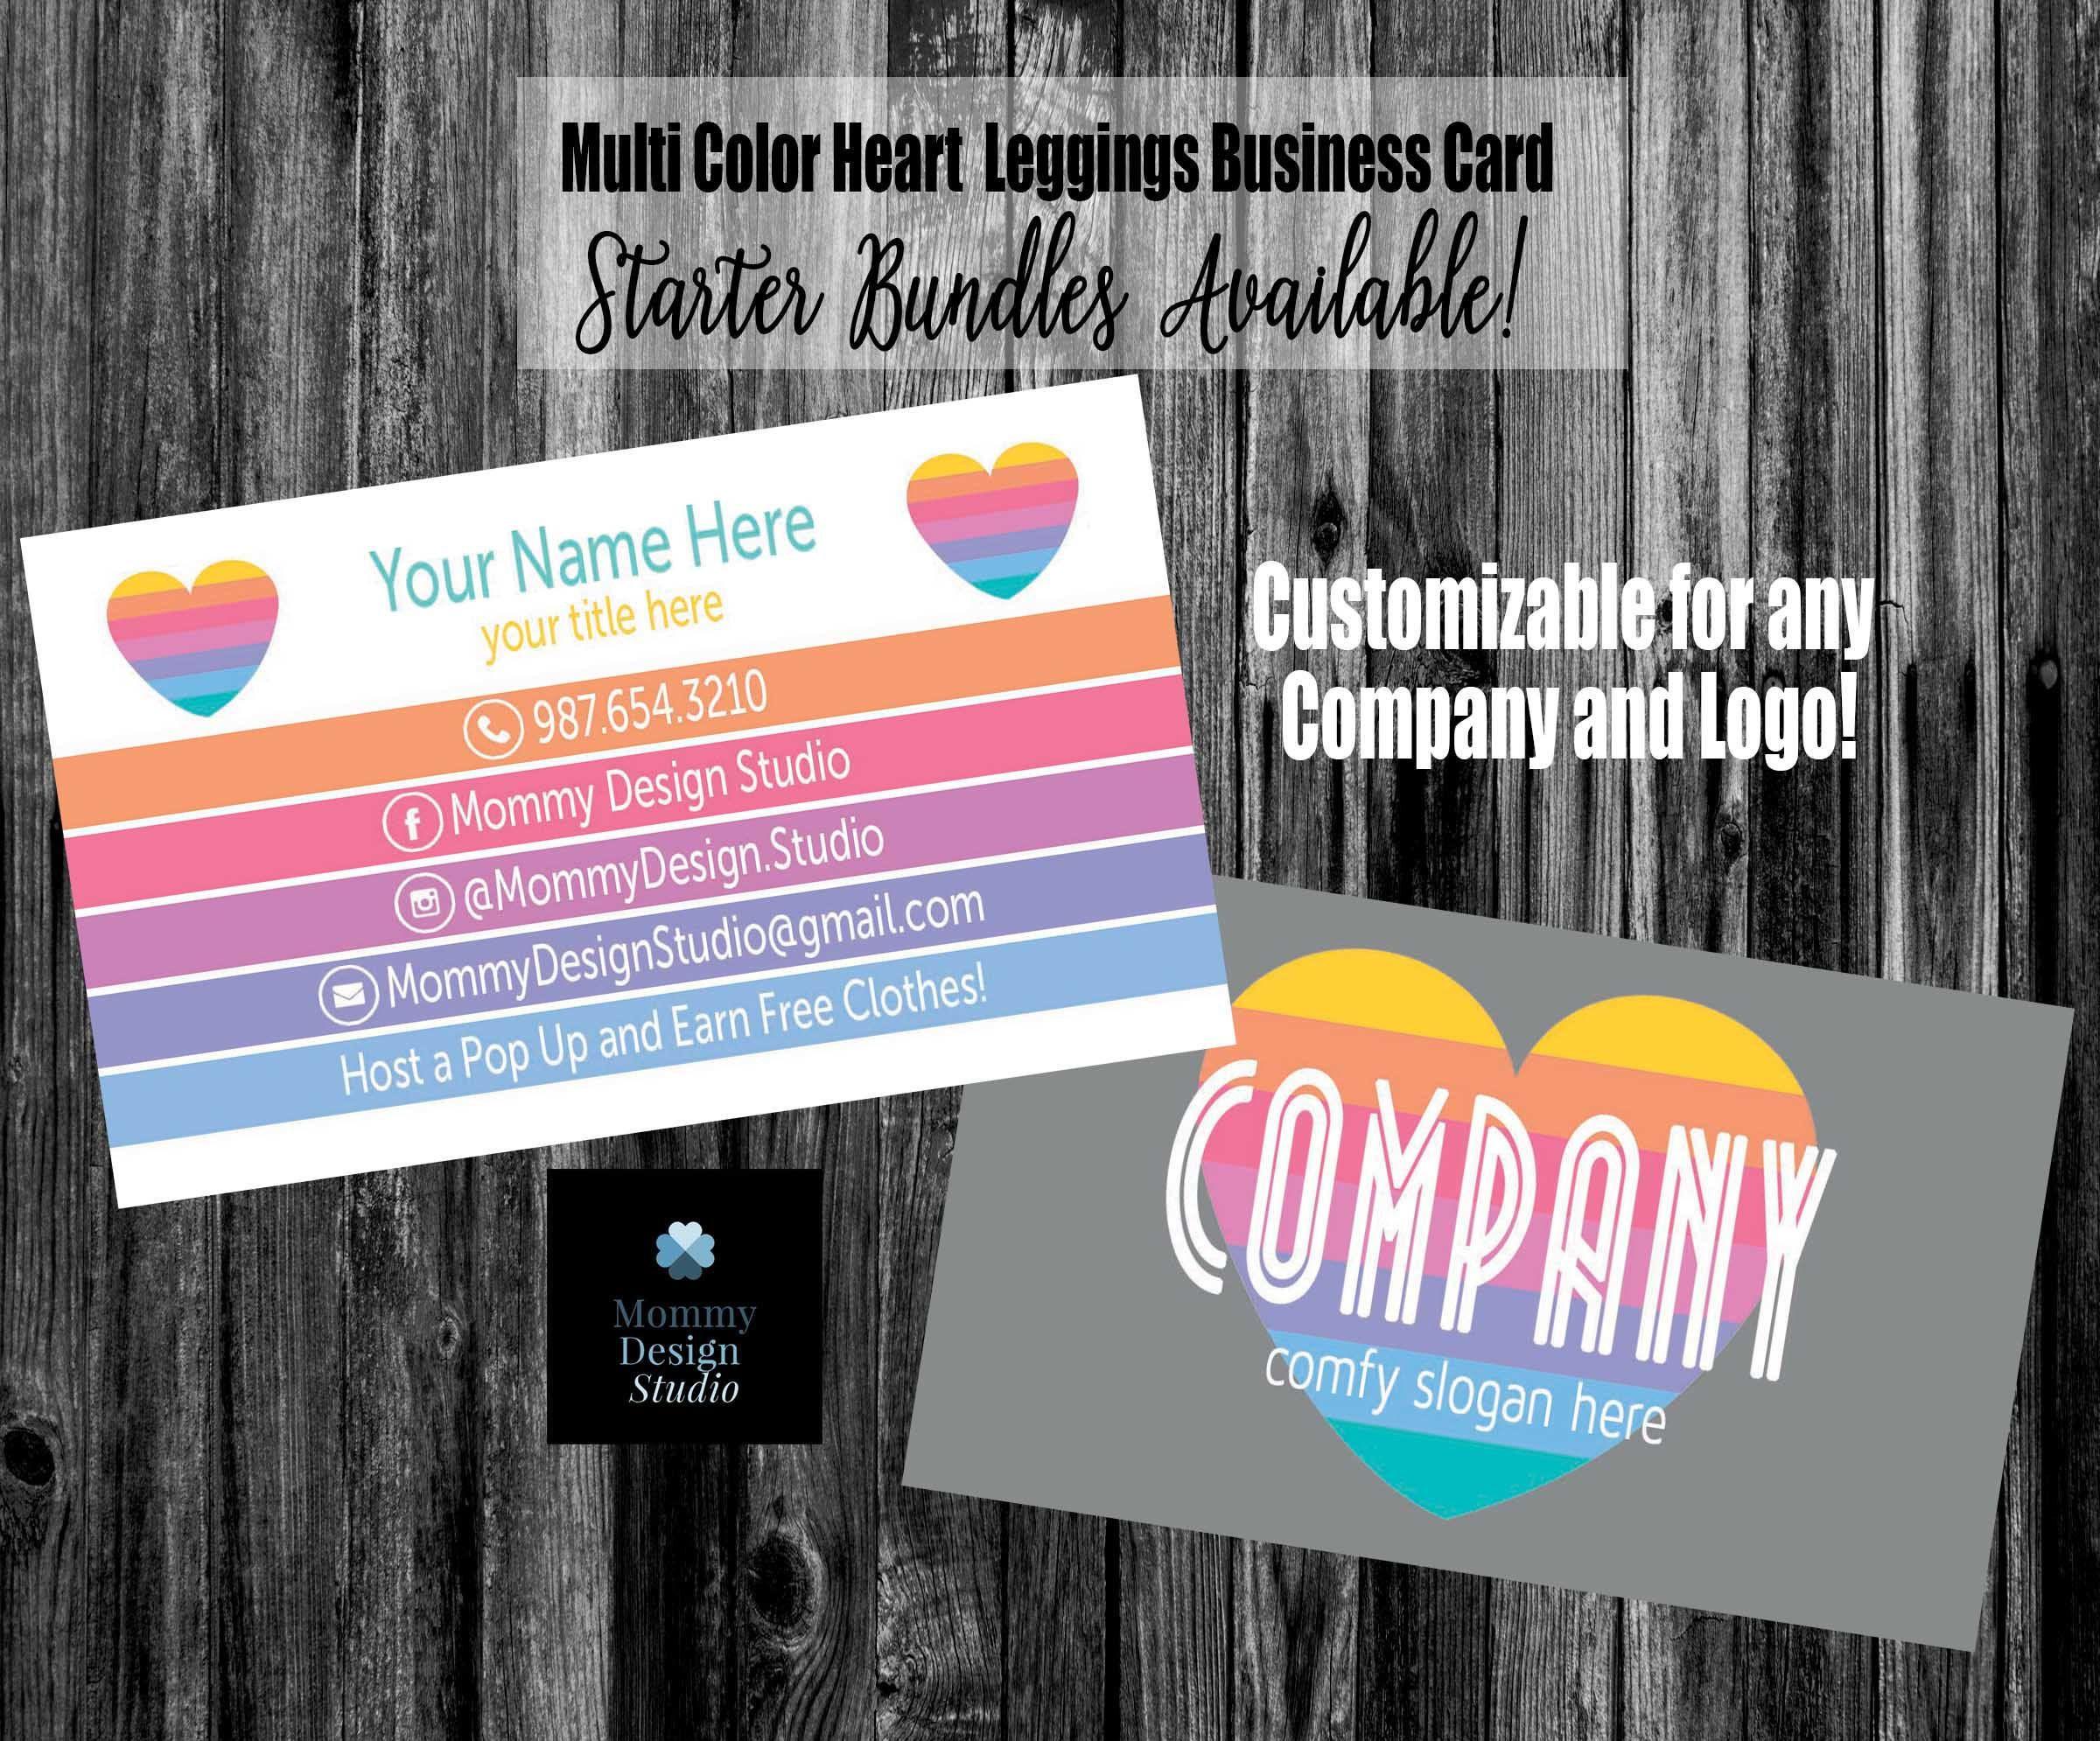 Multicolor Business Logo - MultiColor Heart Leggings Business Card - Home Office Approved Colors/Fonts  - Bundles Offered -Gift Certificate - Punch Card - Care Cards